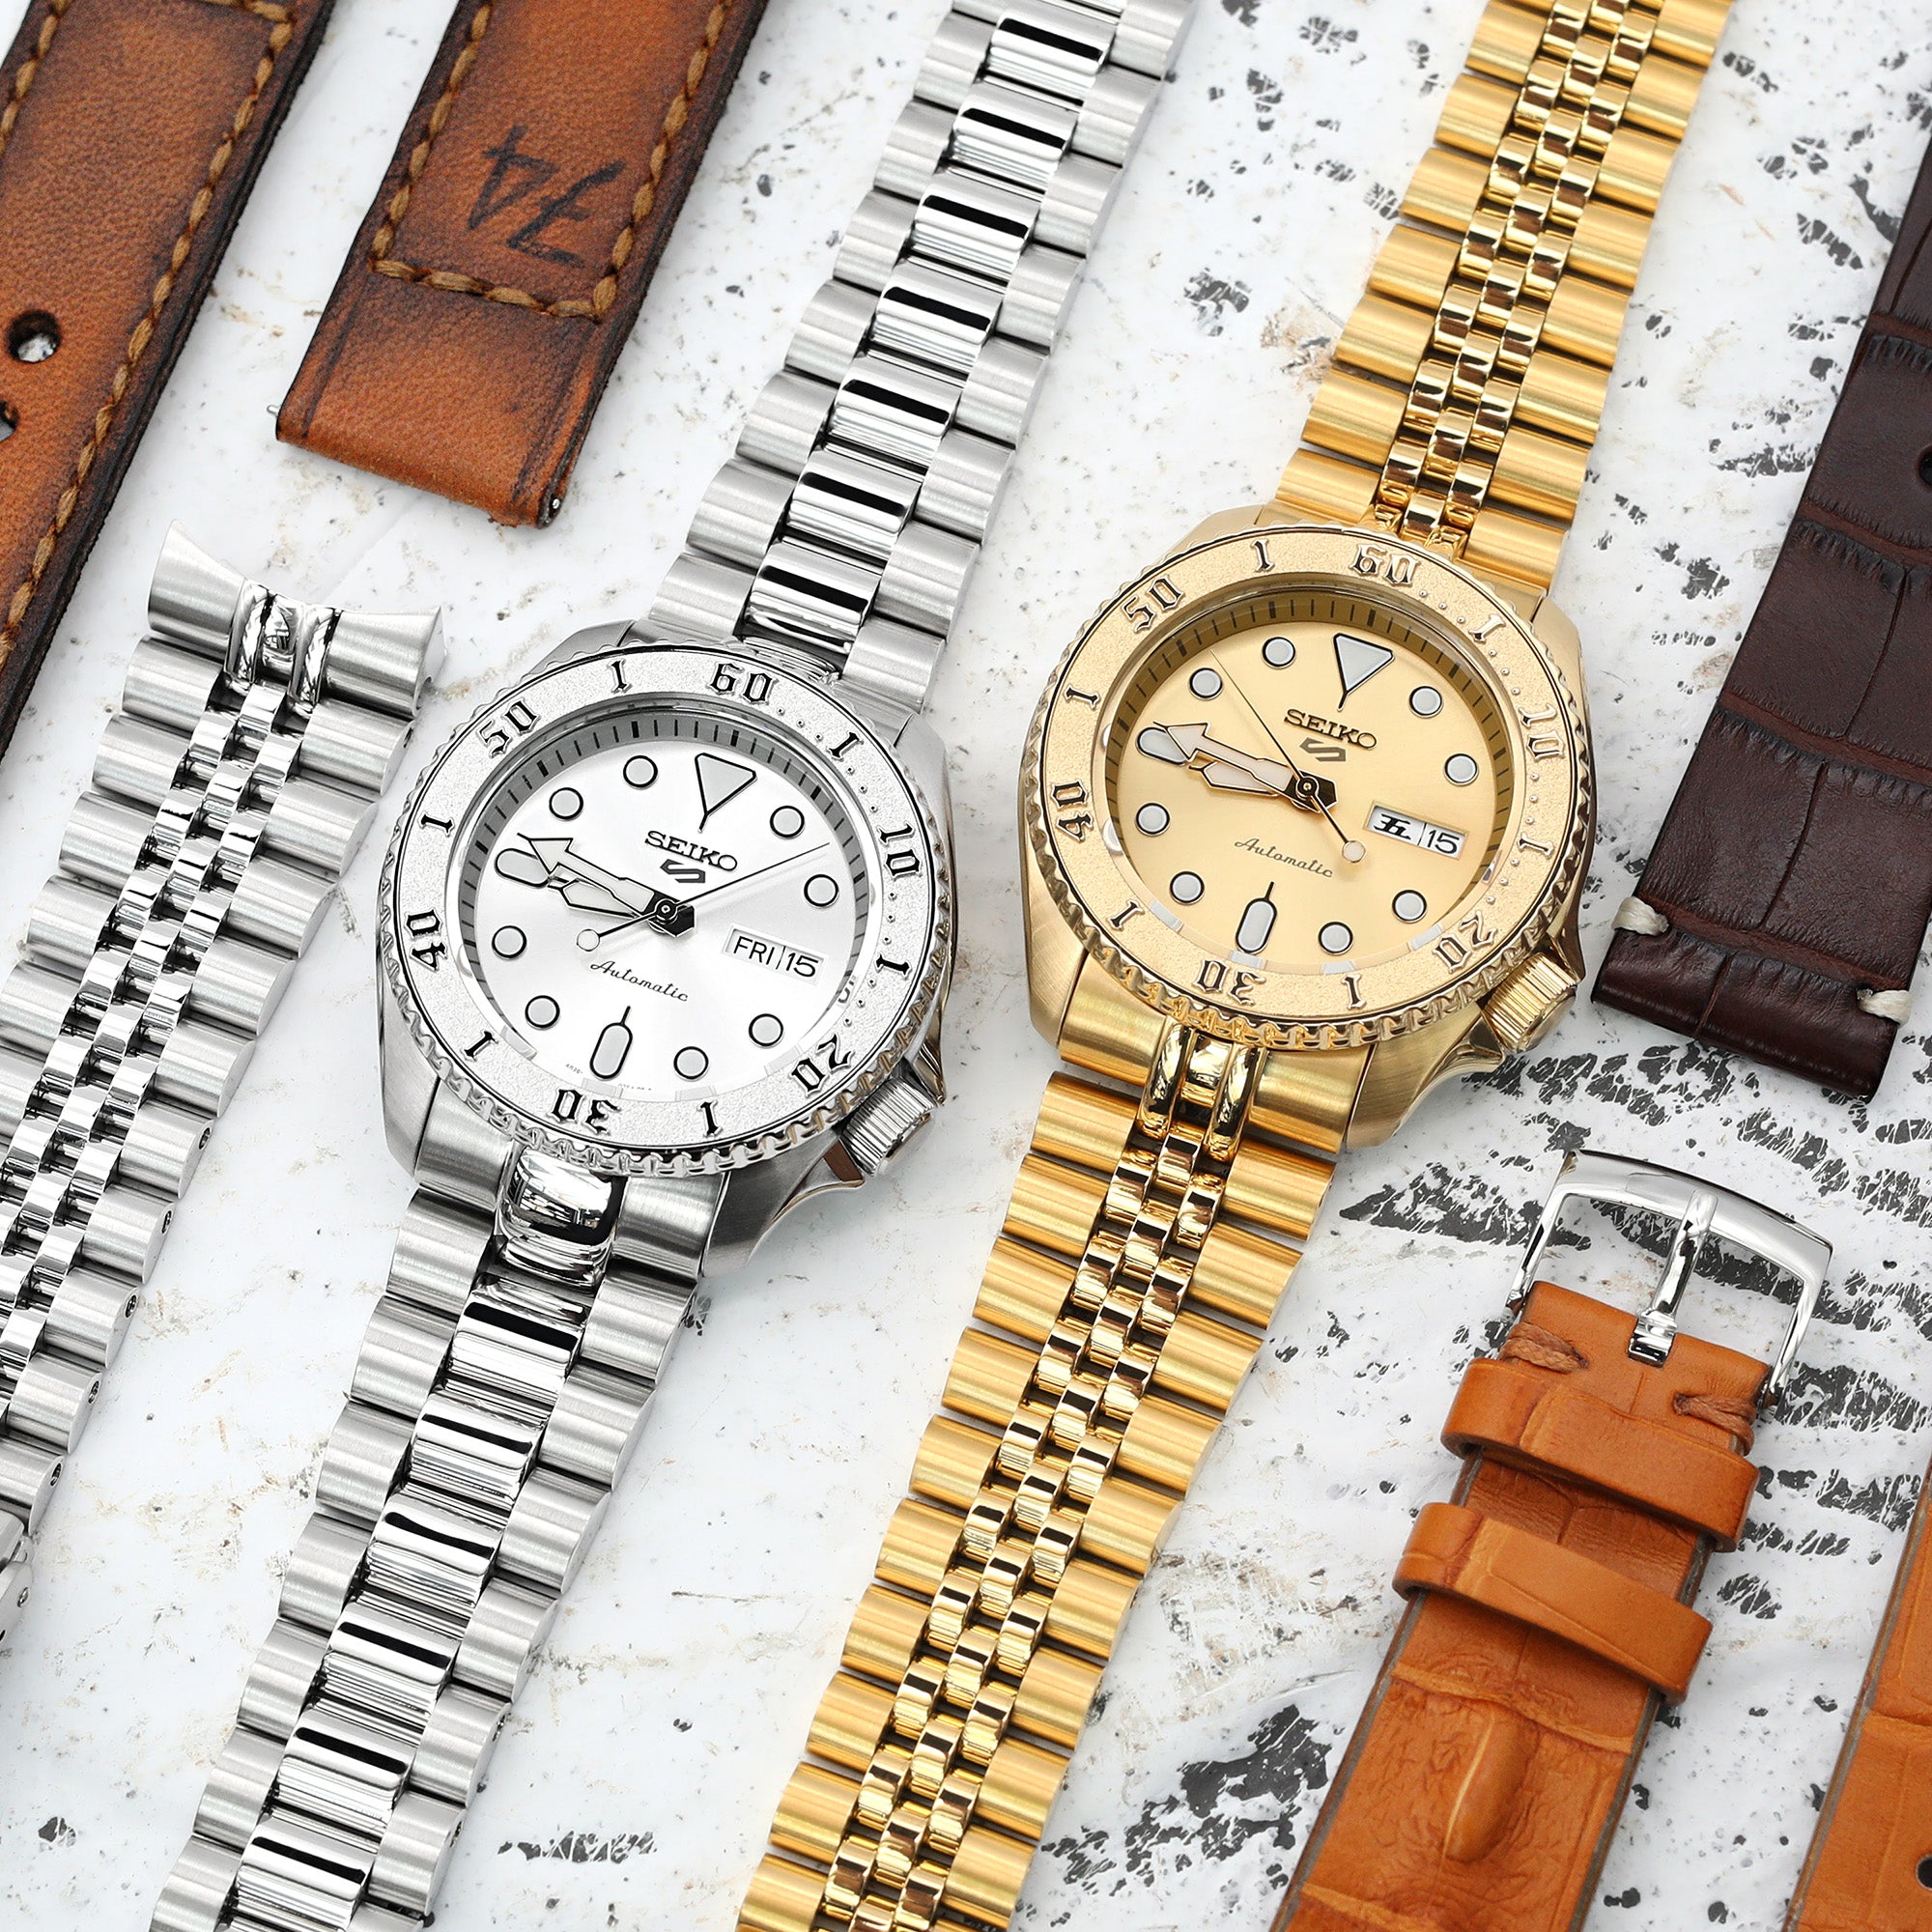 Watch Bands | Comfortable Watch Bands